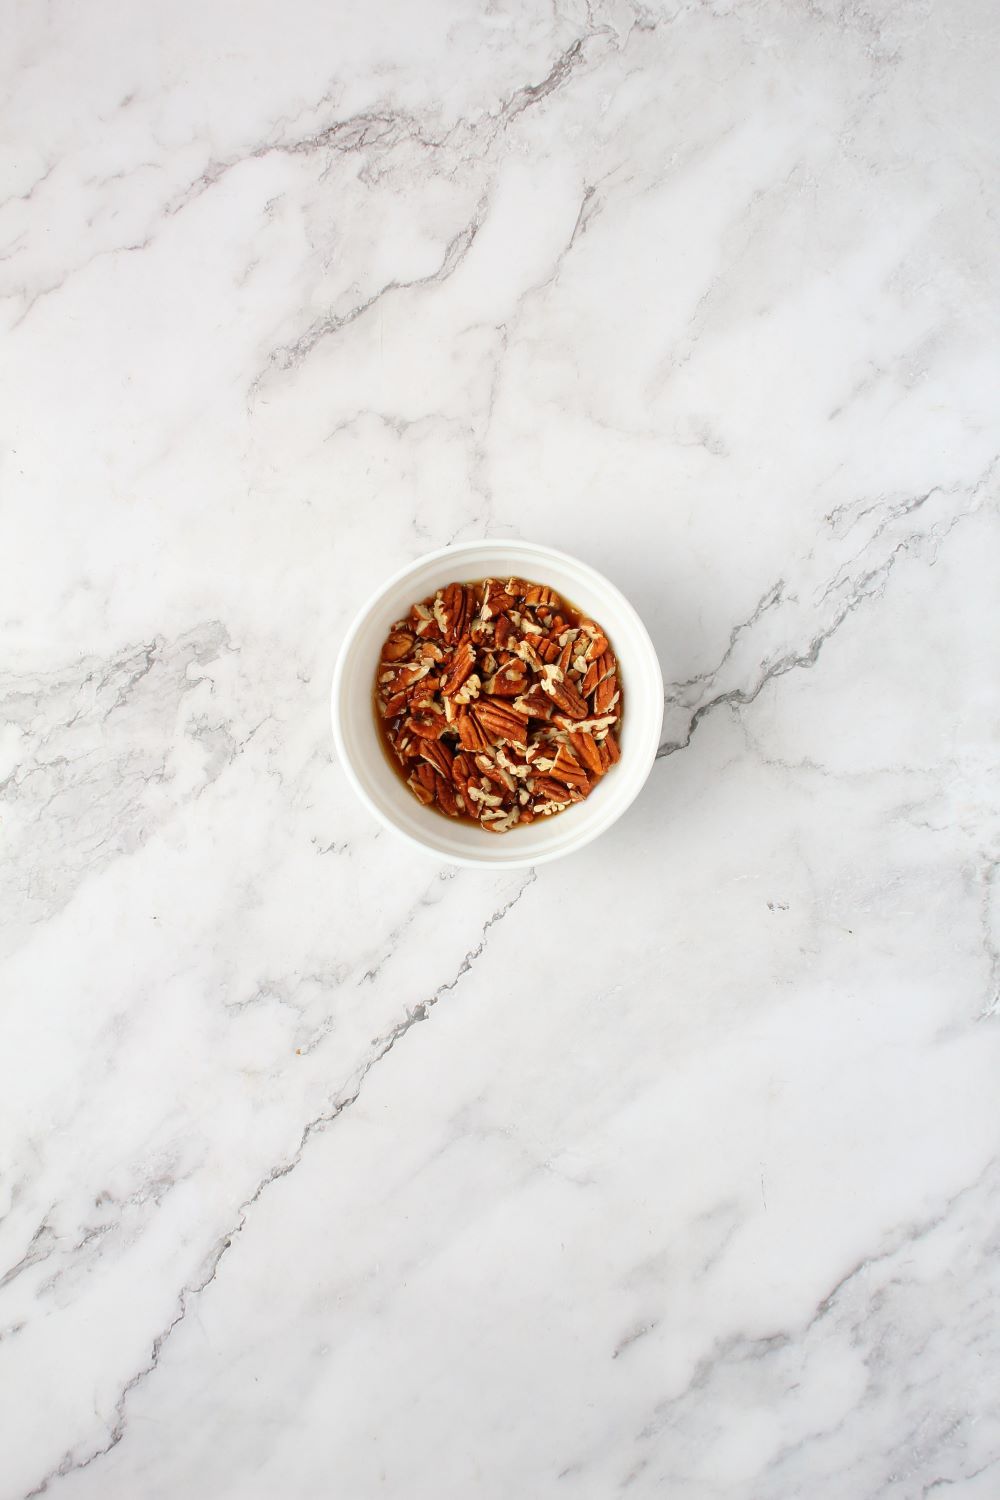 Combining maple syrup and chopped pecans in a bowl